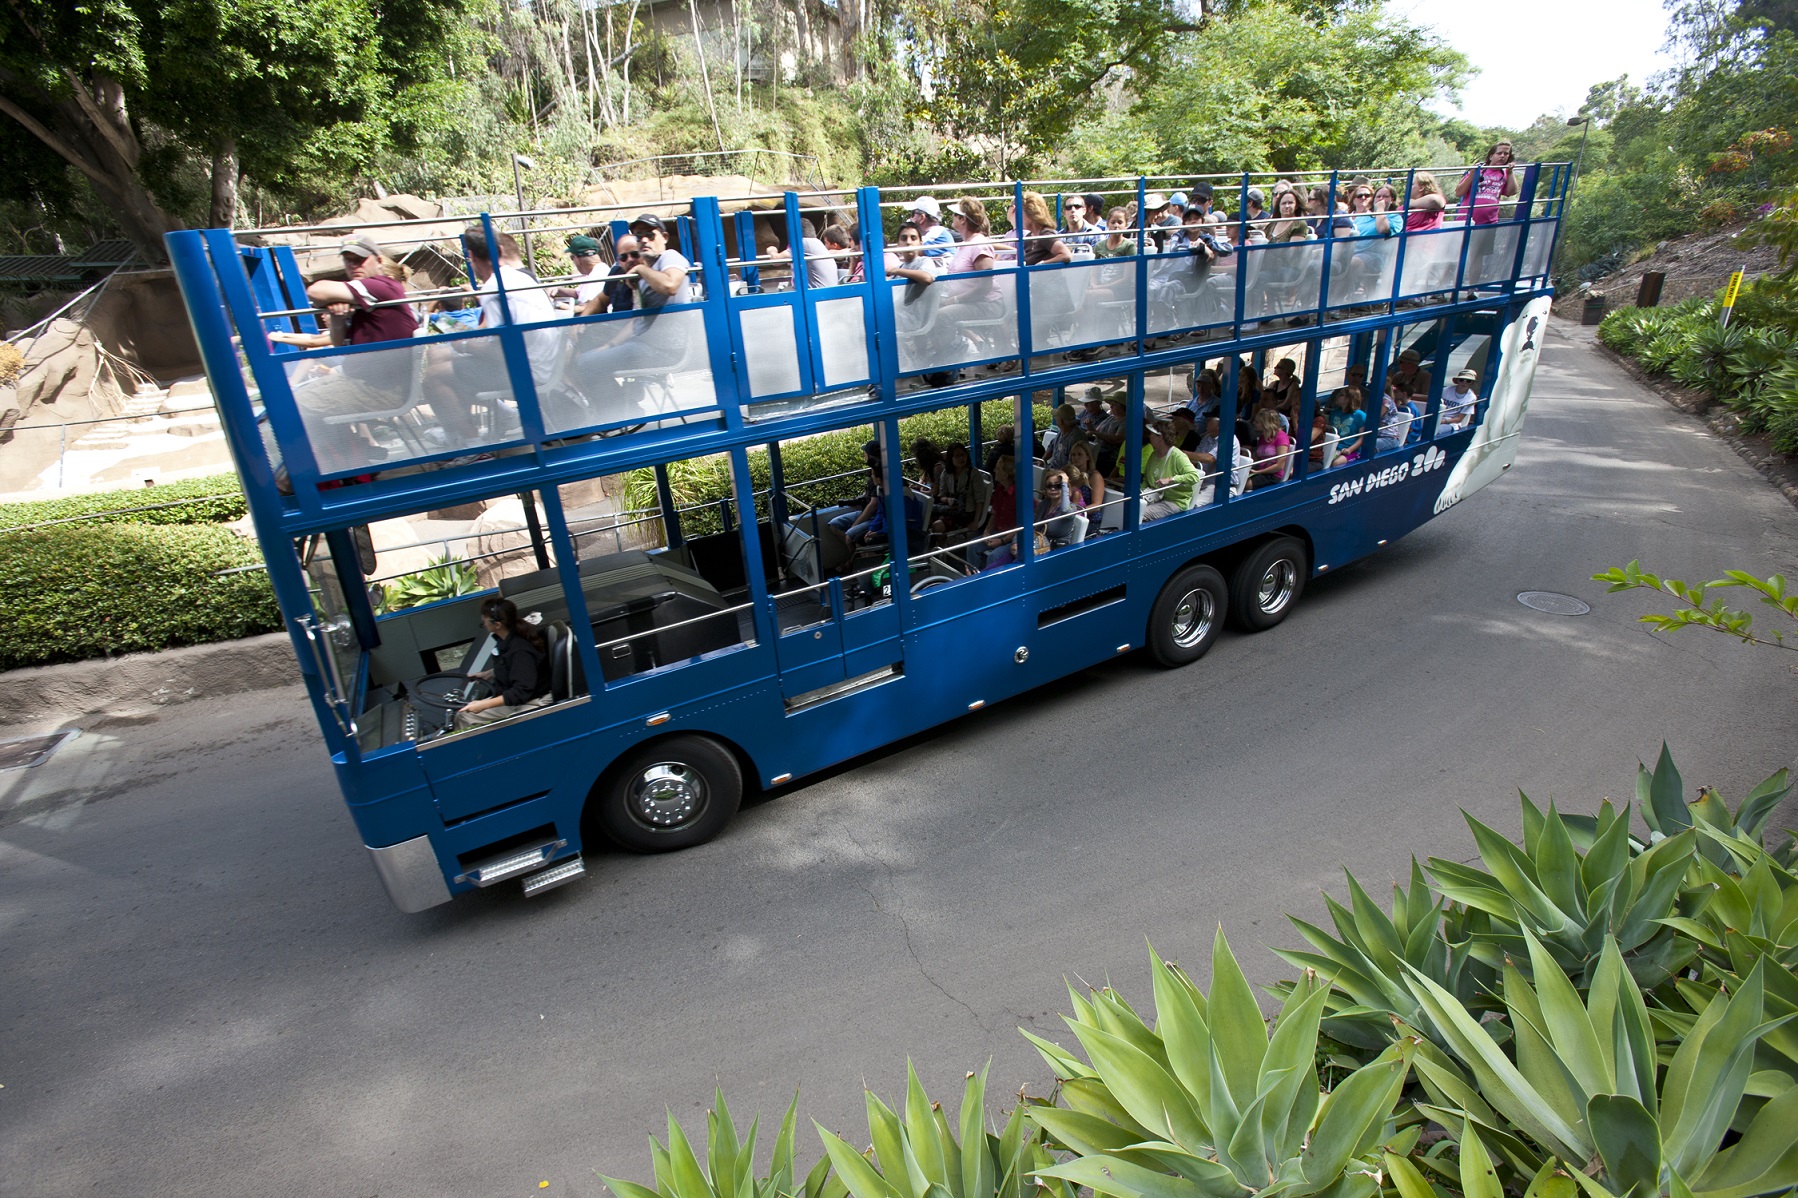 Zoo guided bus tour